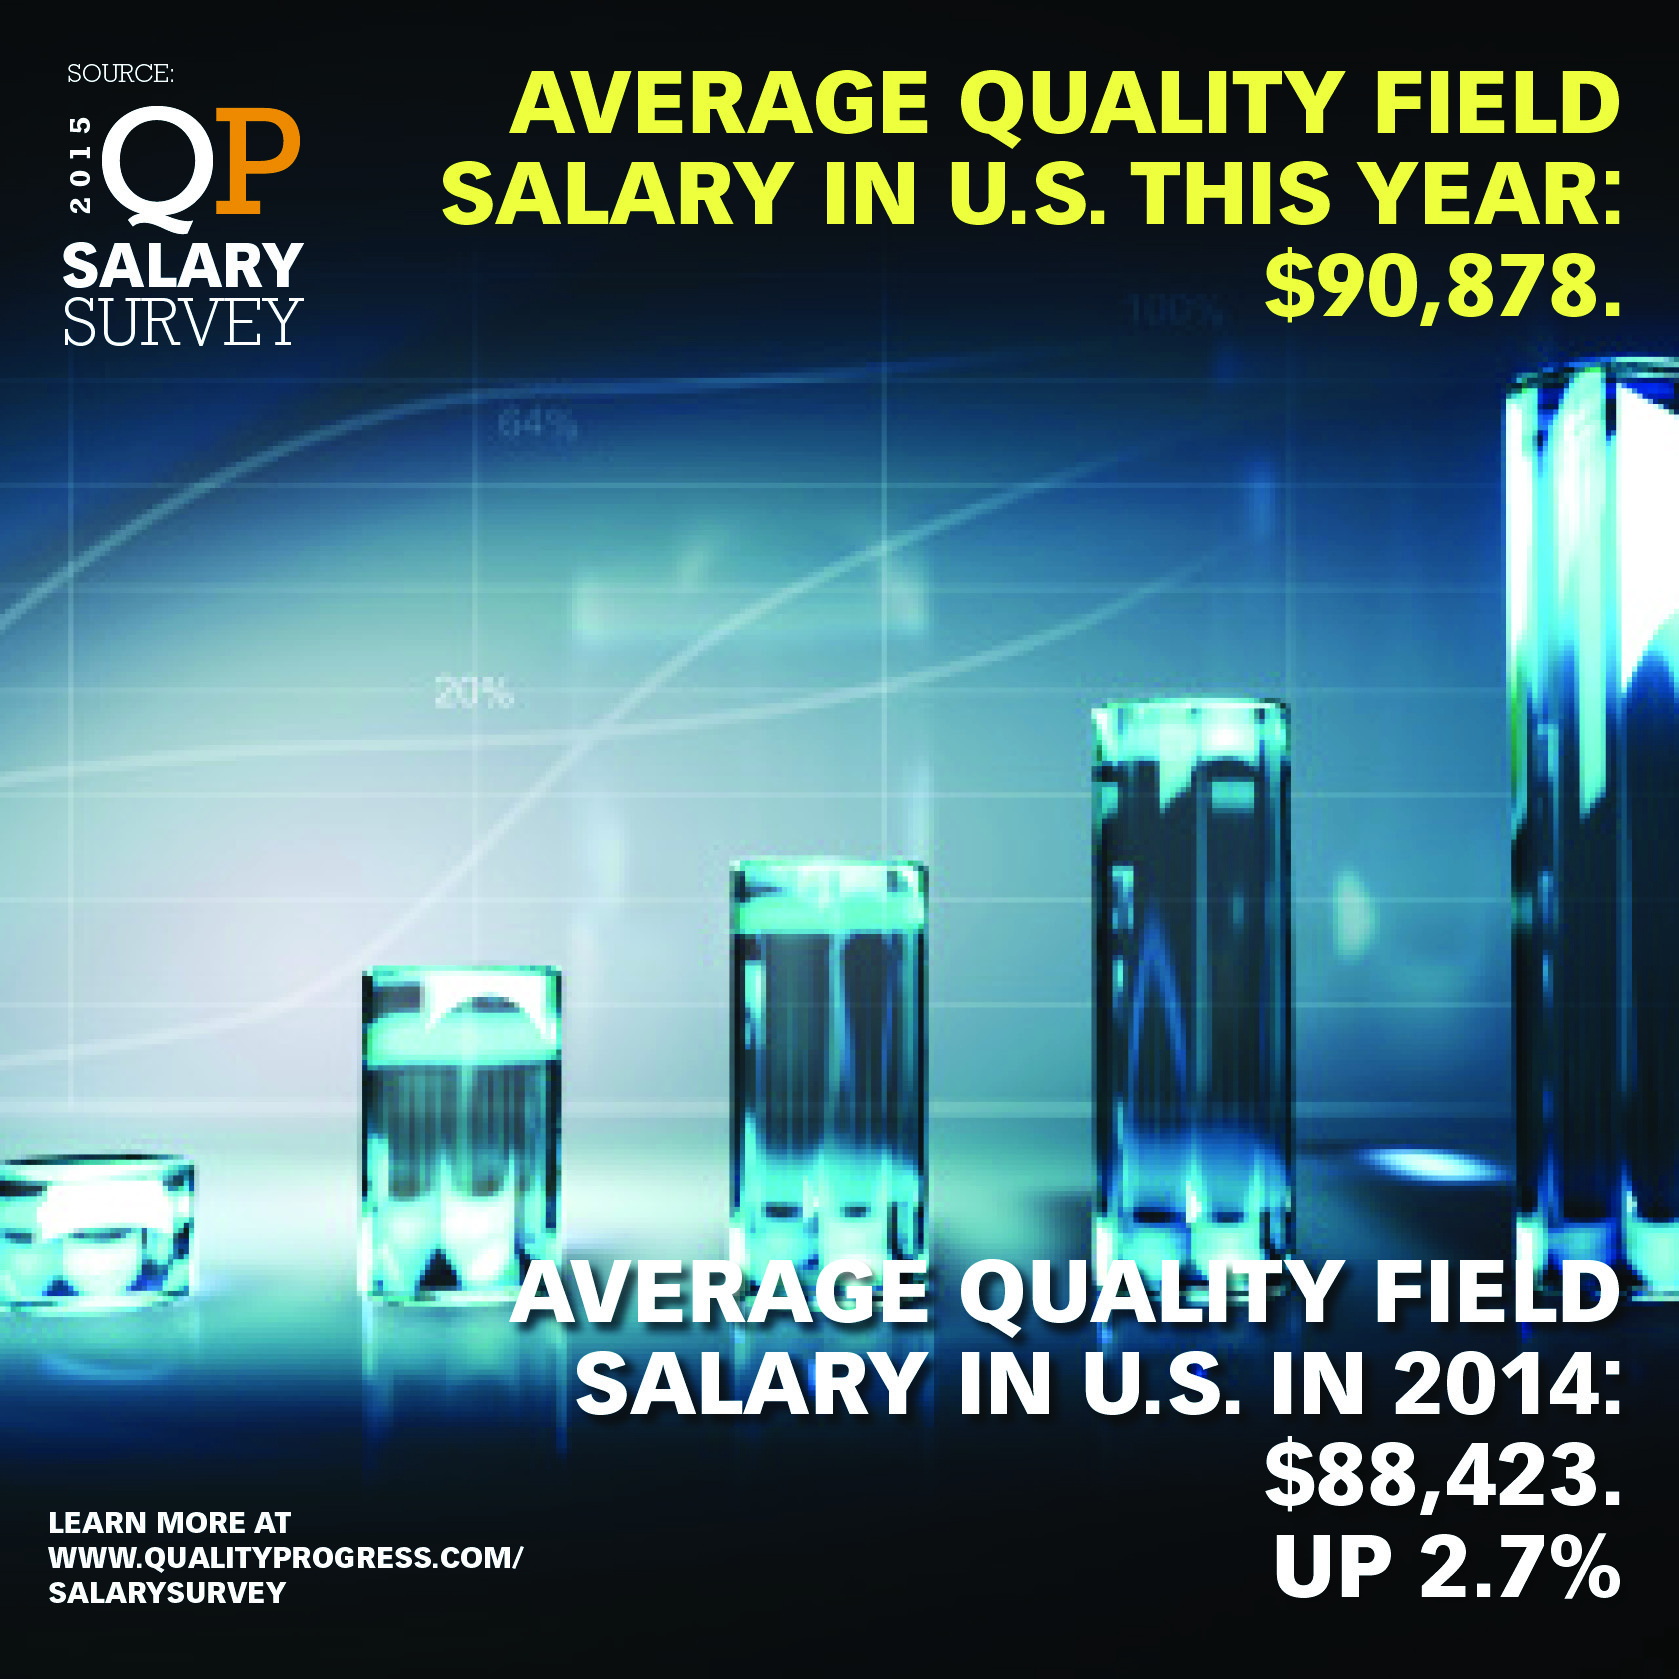 The average salary among quality professionals in the U.S. in 2015 is nearly $91,000.